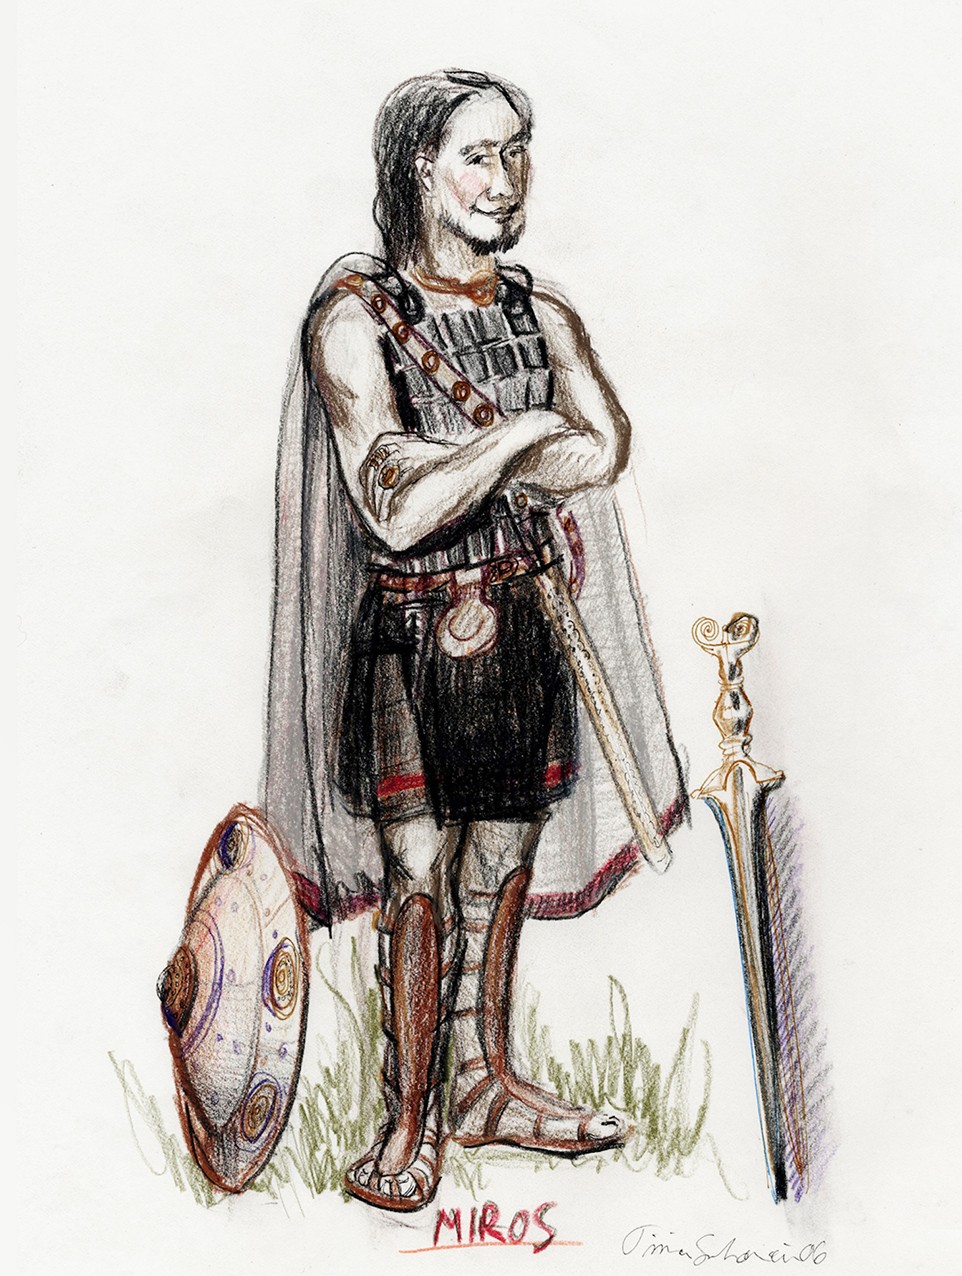 A costume sketch; soldier from ancient Greece